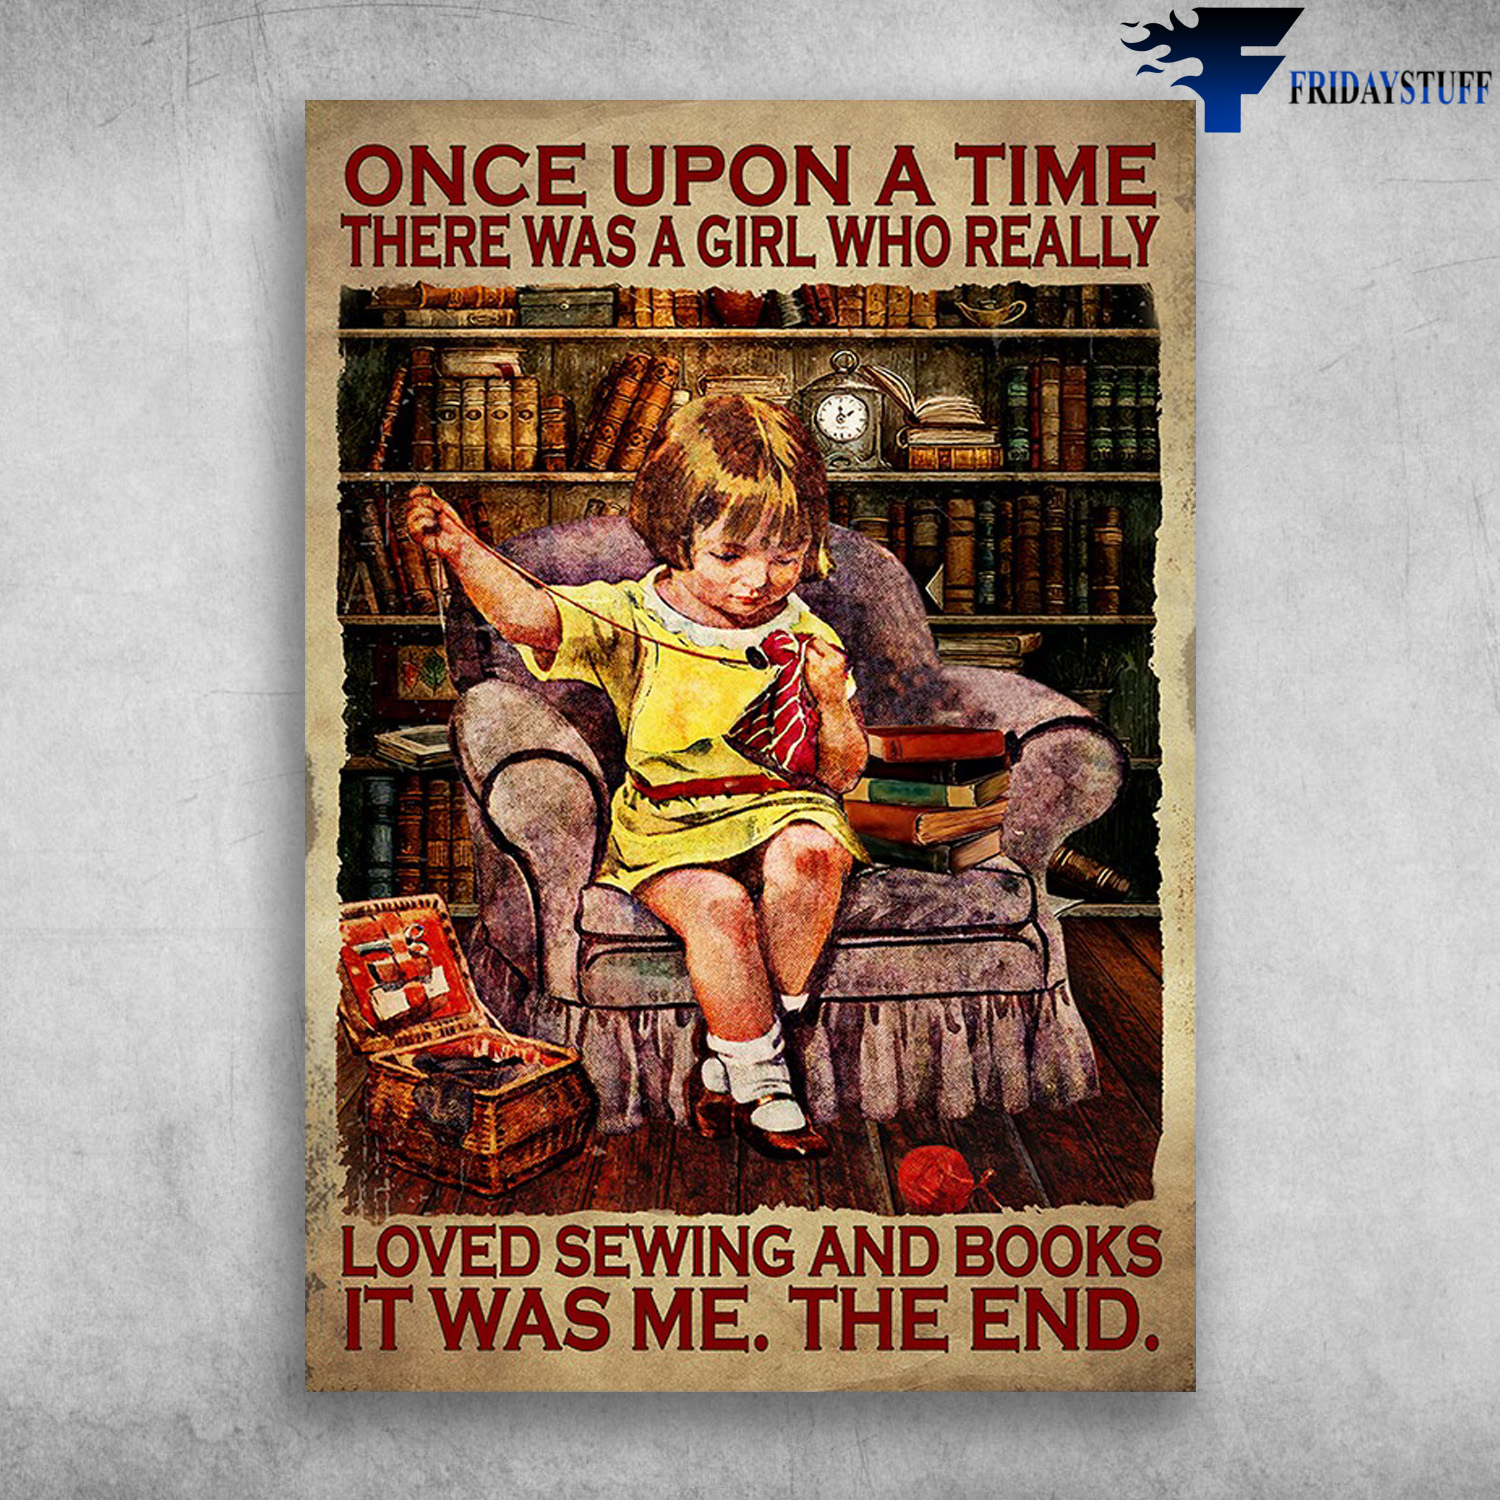 Little Girl Sewing, Book - Once Upon A Time, There Was A Girl Who Really Love Sewing And Books, It Was Me, The End